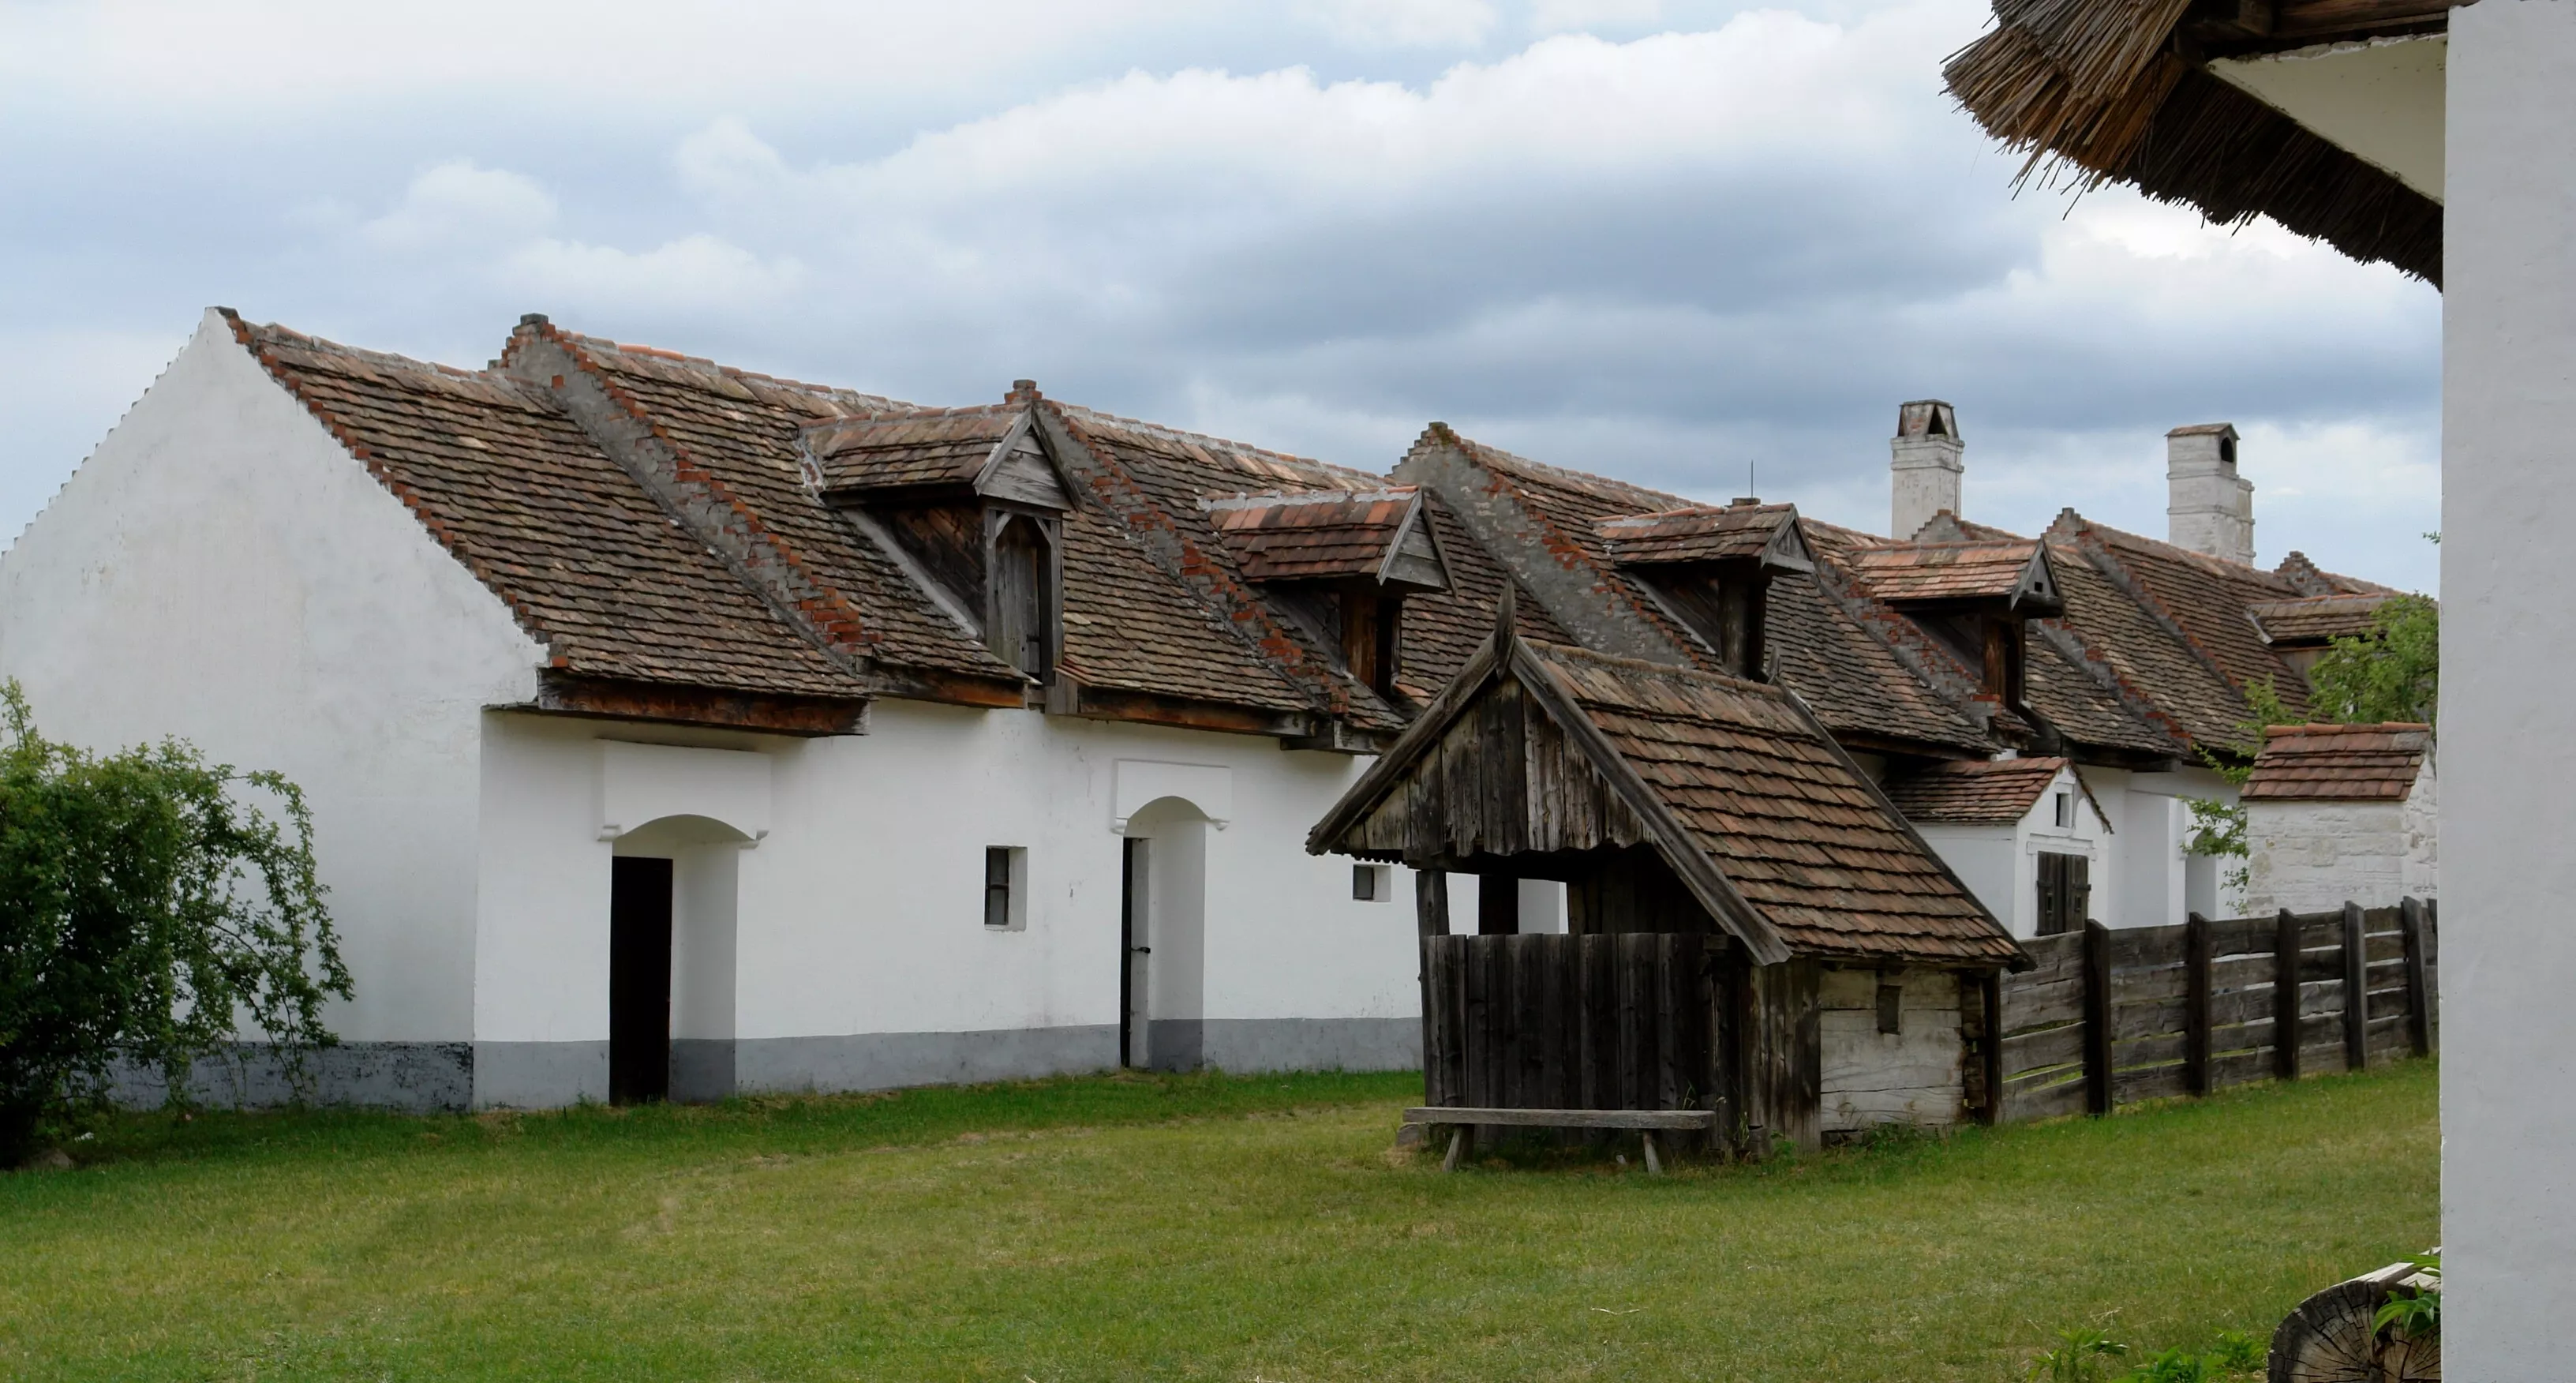 Szentendre Skanzen Village Museum in Hungary, Europe | Museums,Traditional Villages - Rated 4.9